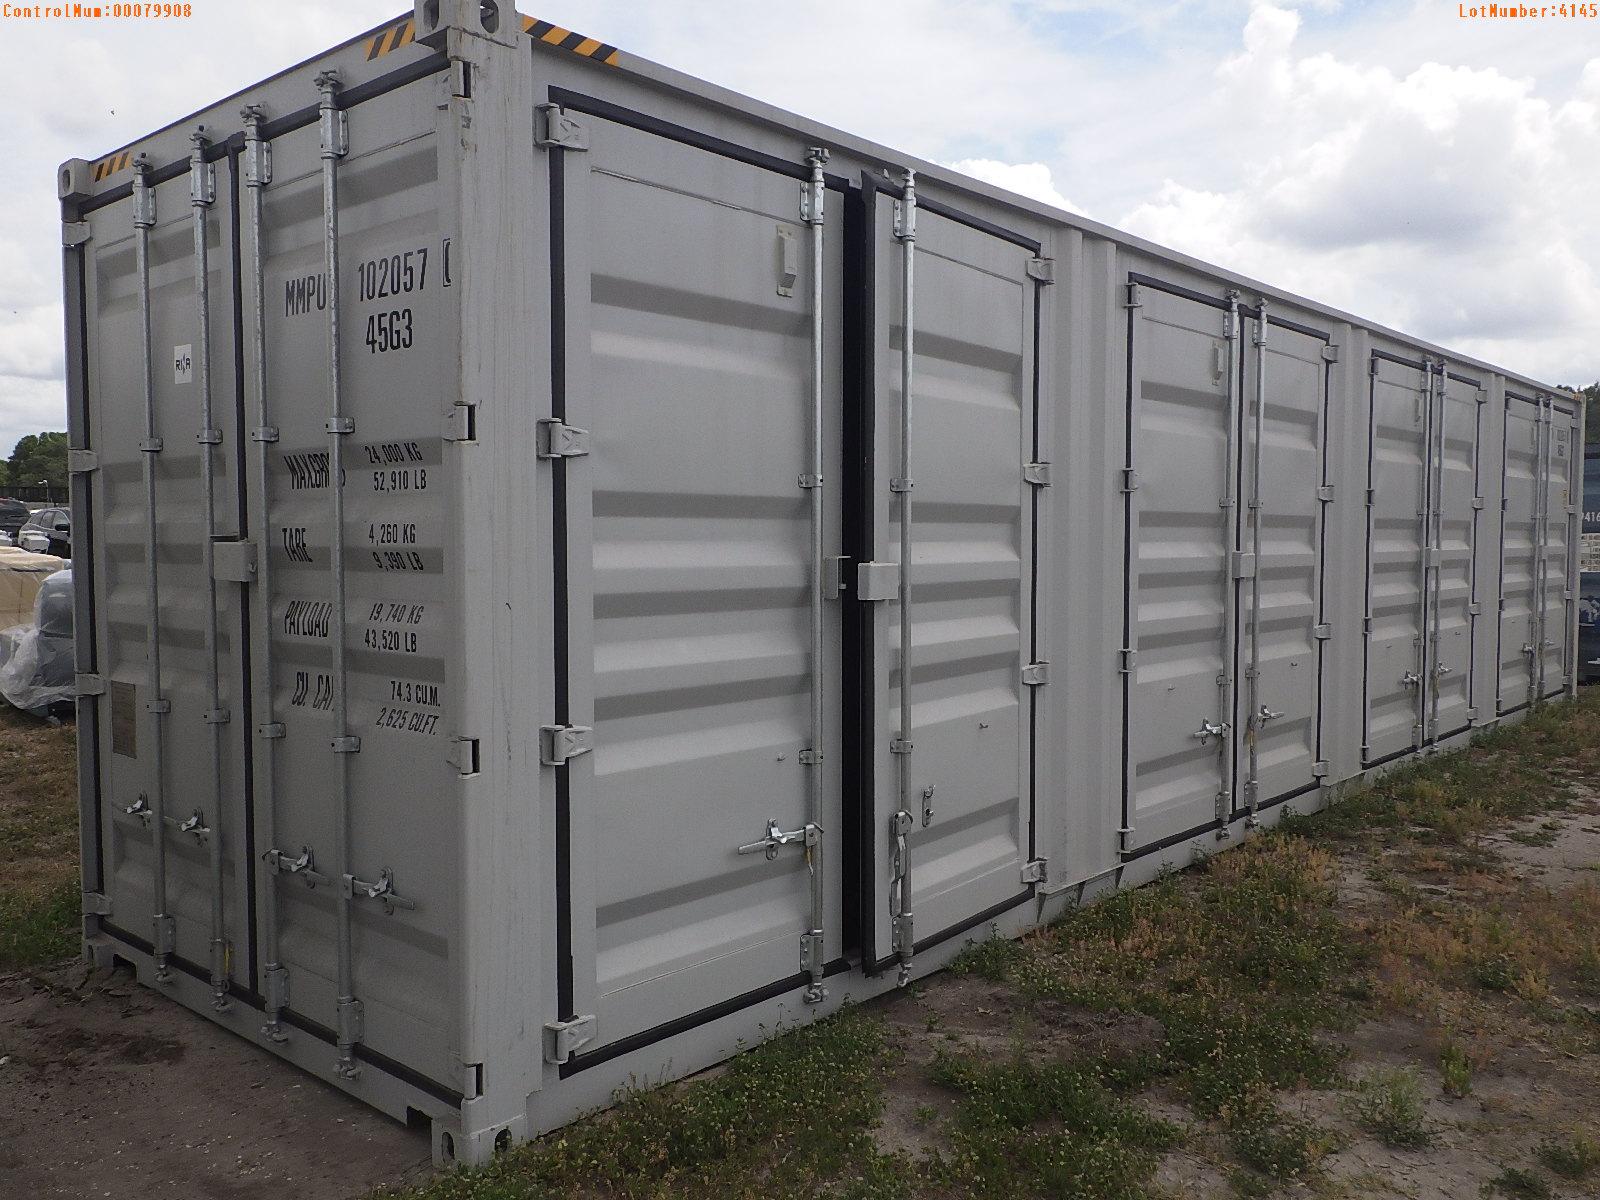 5-04145 (Equip.-Container)  Seller:Private/Dealer 40 FOOT METAL SHIPPING CONTAIN